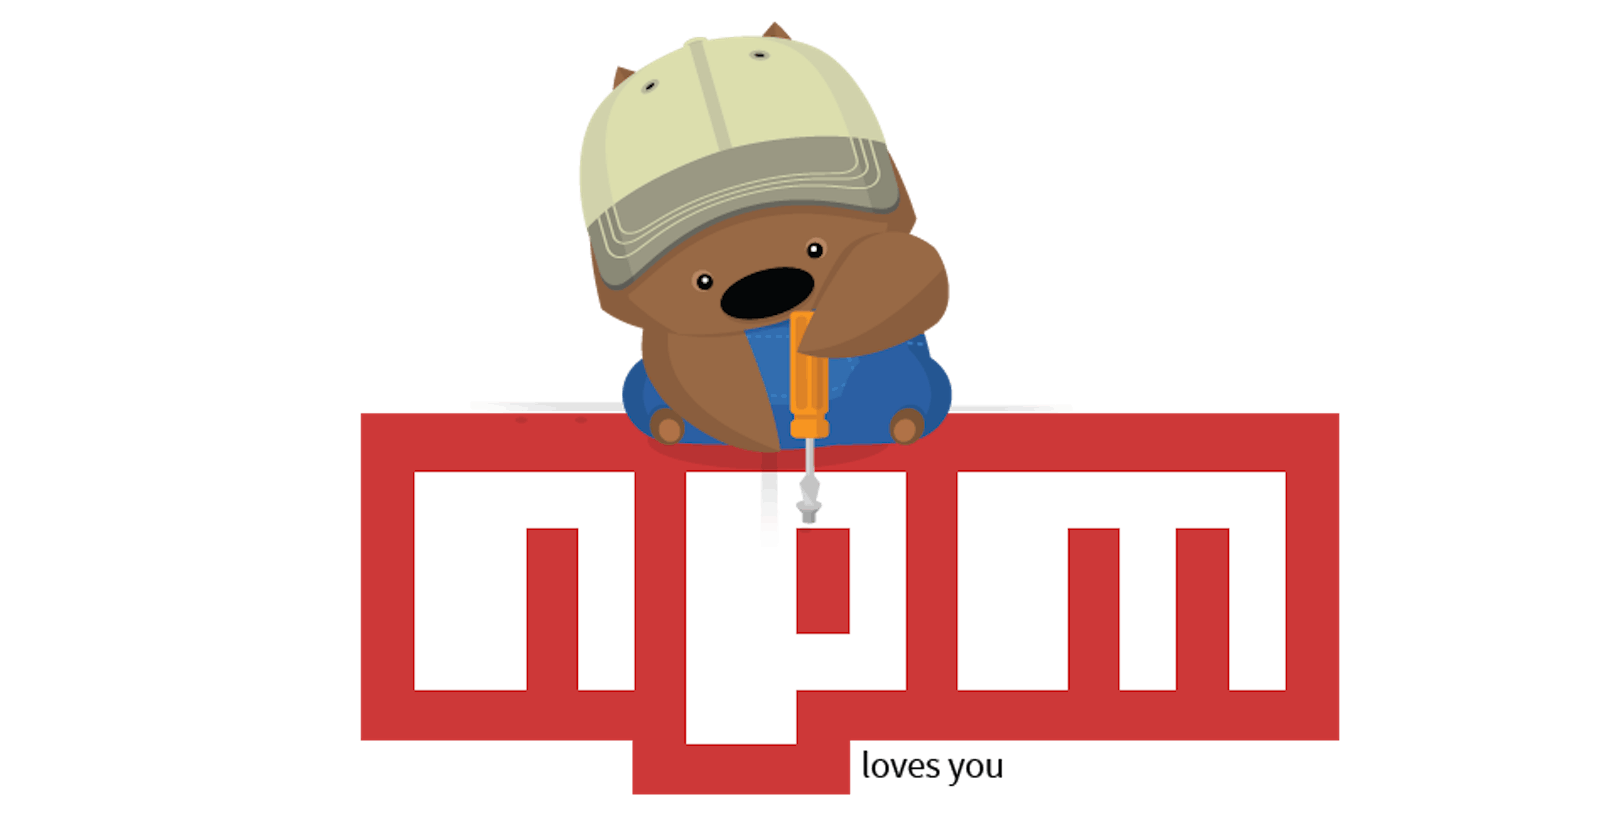 Publish your own Custom Angular Library on NPM within 15 min!!